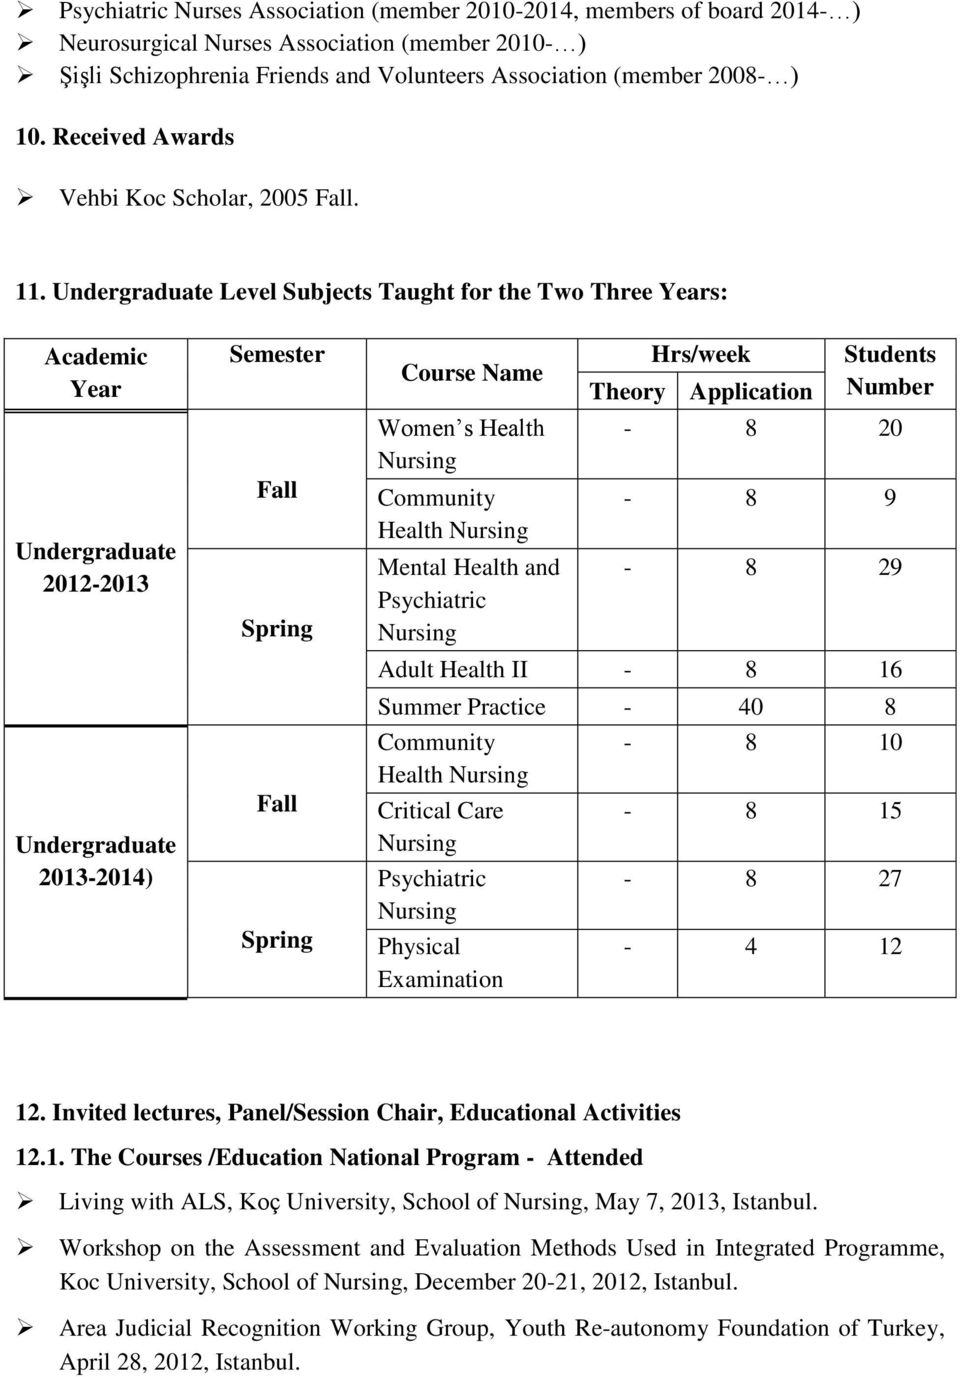 Undergraduate Level Subjects Taught for the Two Three Years: Academic Year Undergraduate 2012-2013 Undergraduate 2013-2014) Semester Fall Spring Fall Spring Course Name Women s Health Community